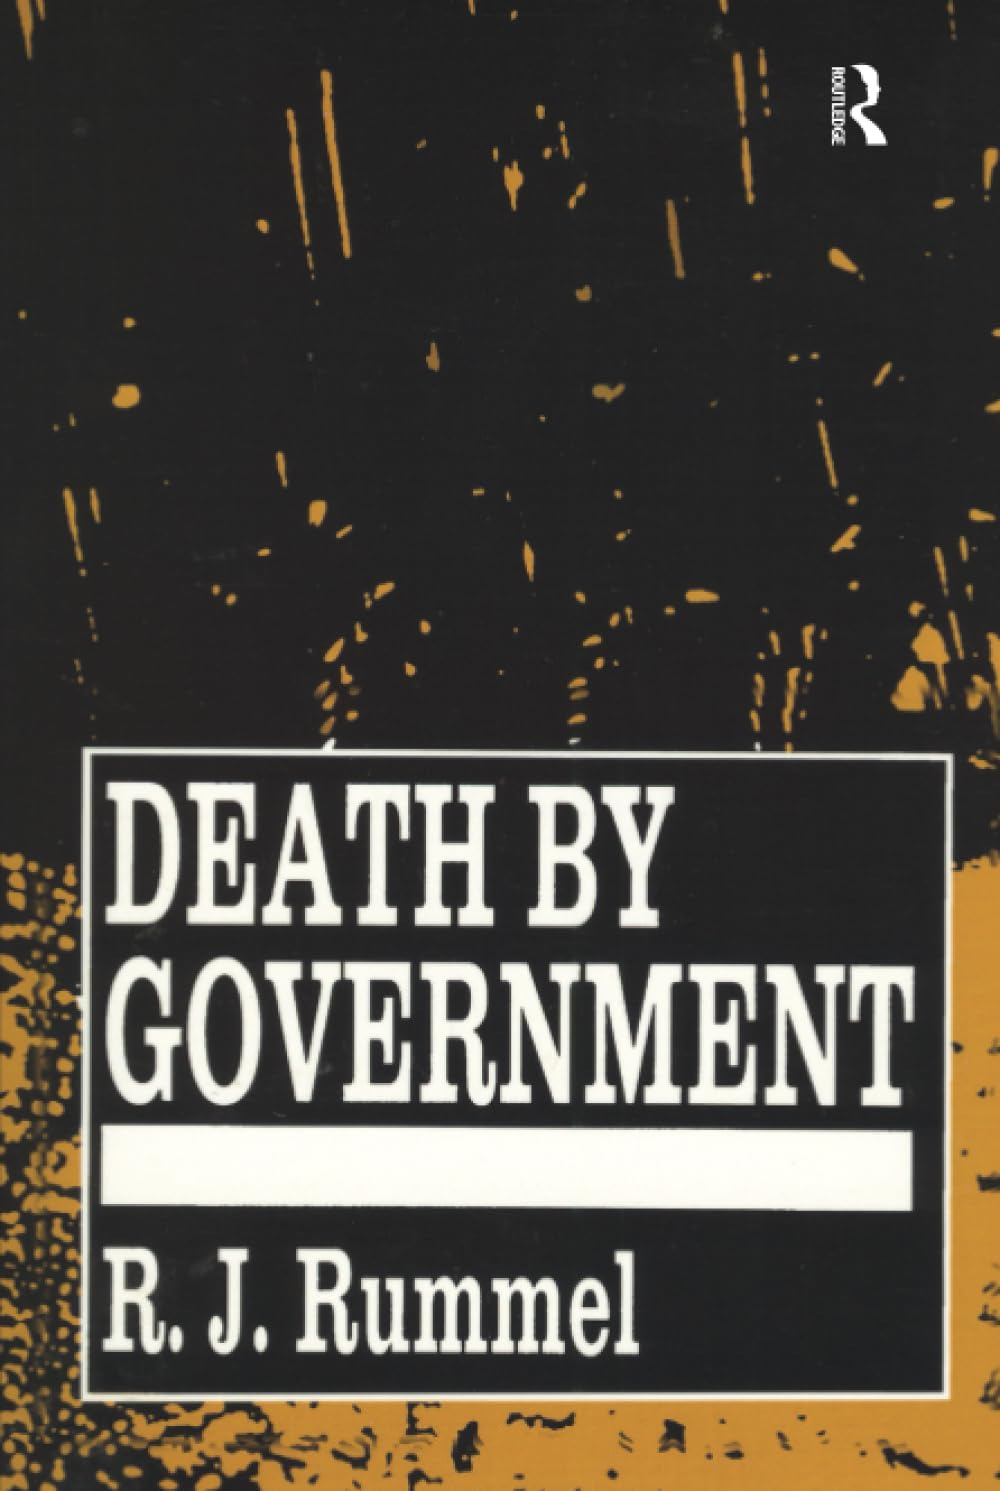 death by government book by RJ Rummel